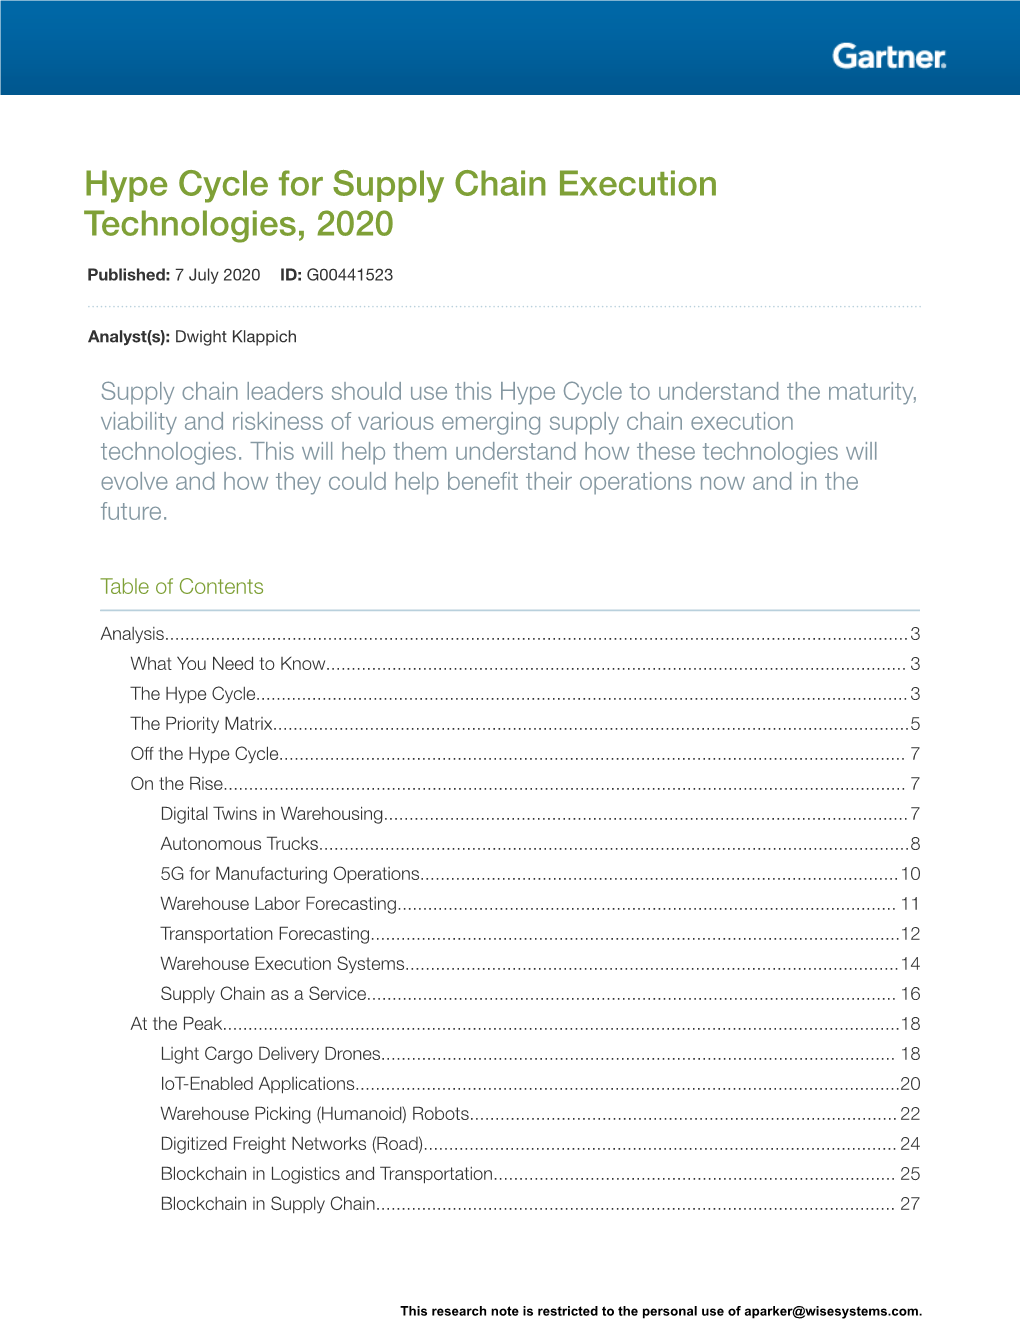 Hype Cycle for Supply Chain Execution Technologies, 2020